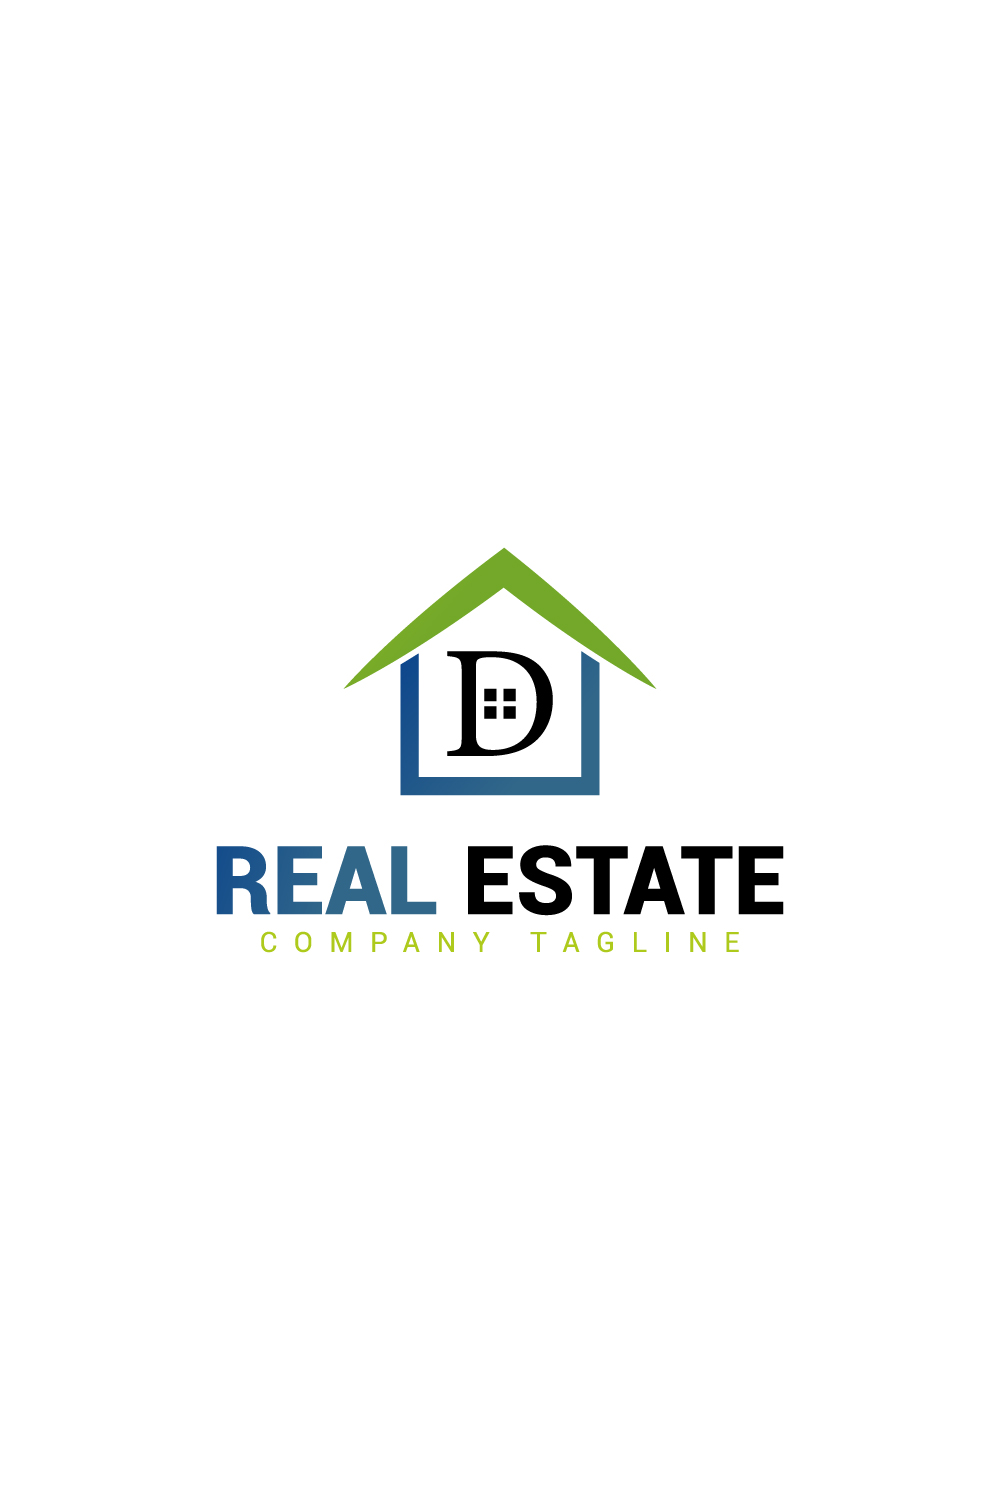 Real estate logo with green, dark blue color and D letter pinterest preview image.